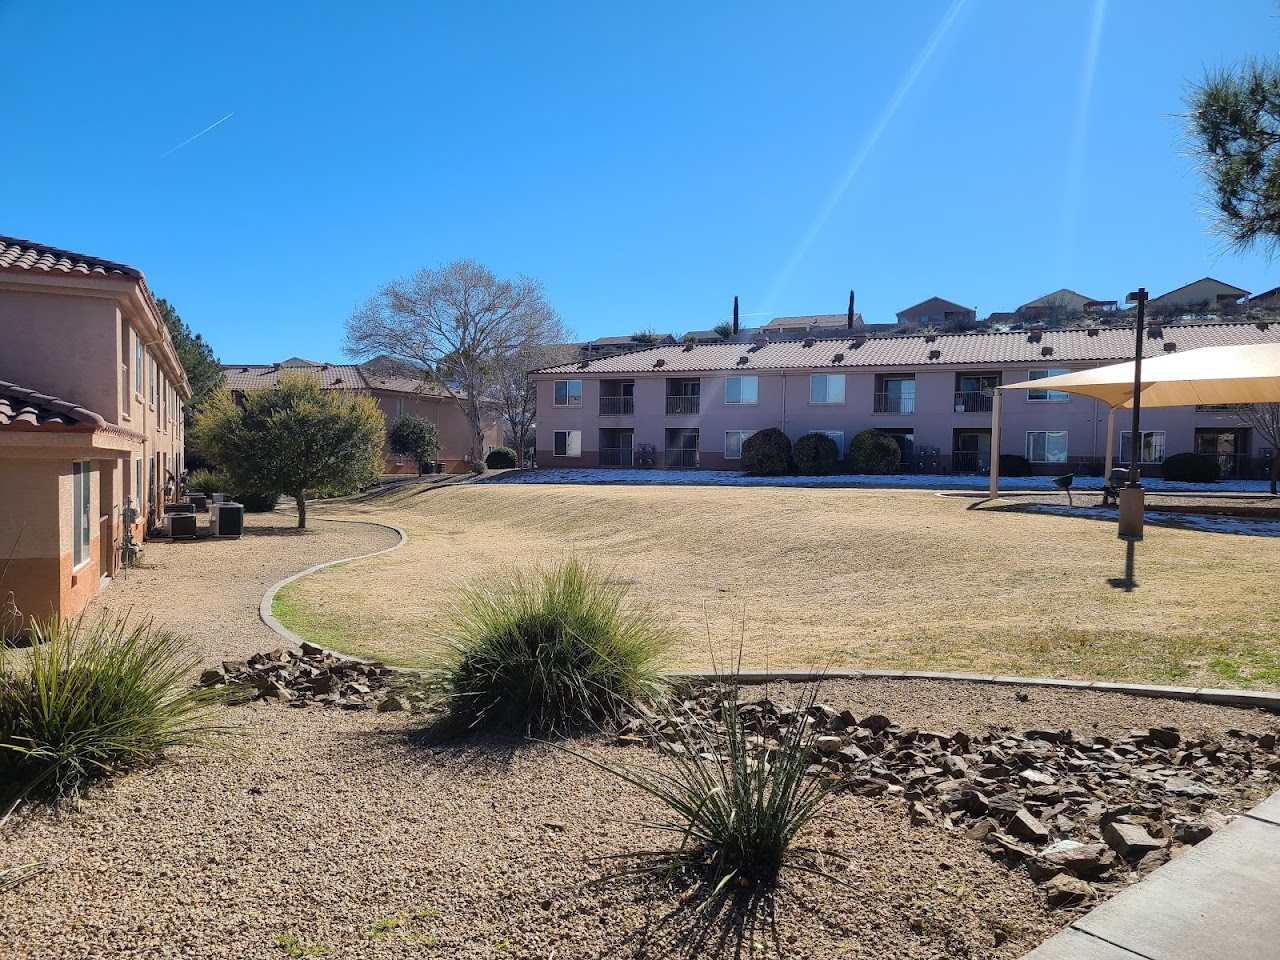 Photo of PARKWAY APTS. Affordable housing located at 300 E CLIFFS PKWY CAMP VERDE, AZ 86322